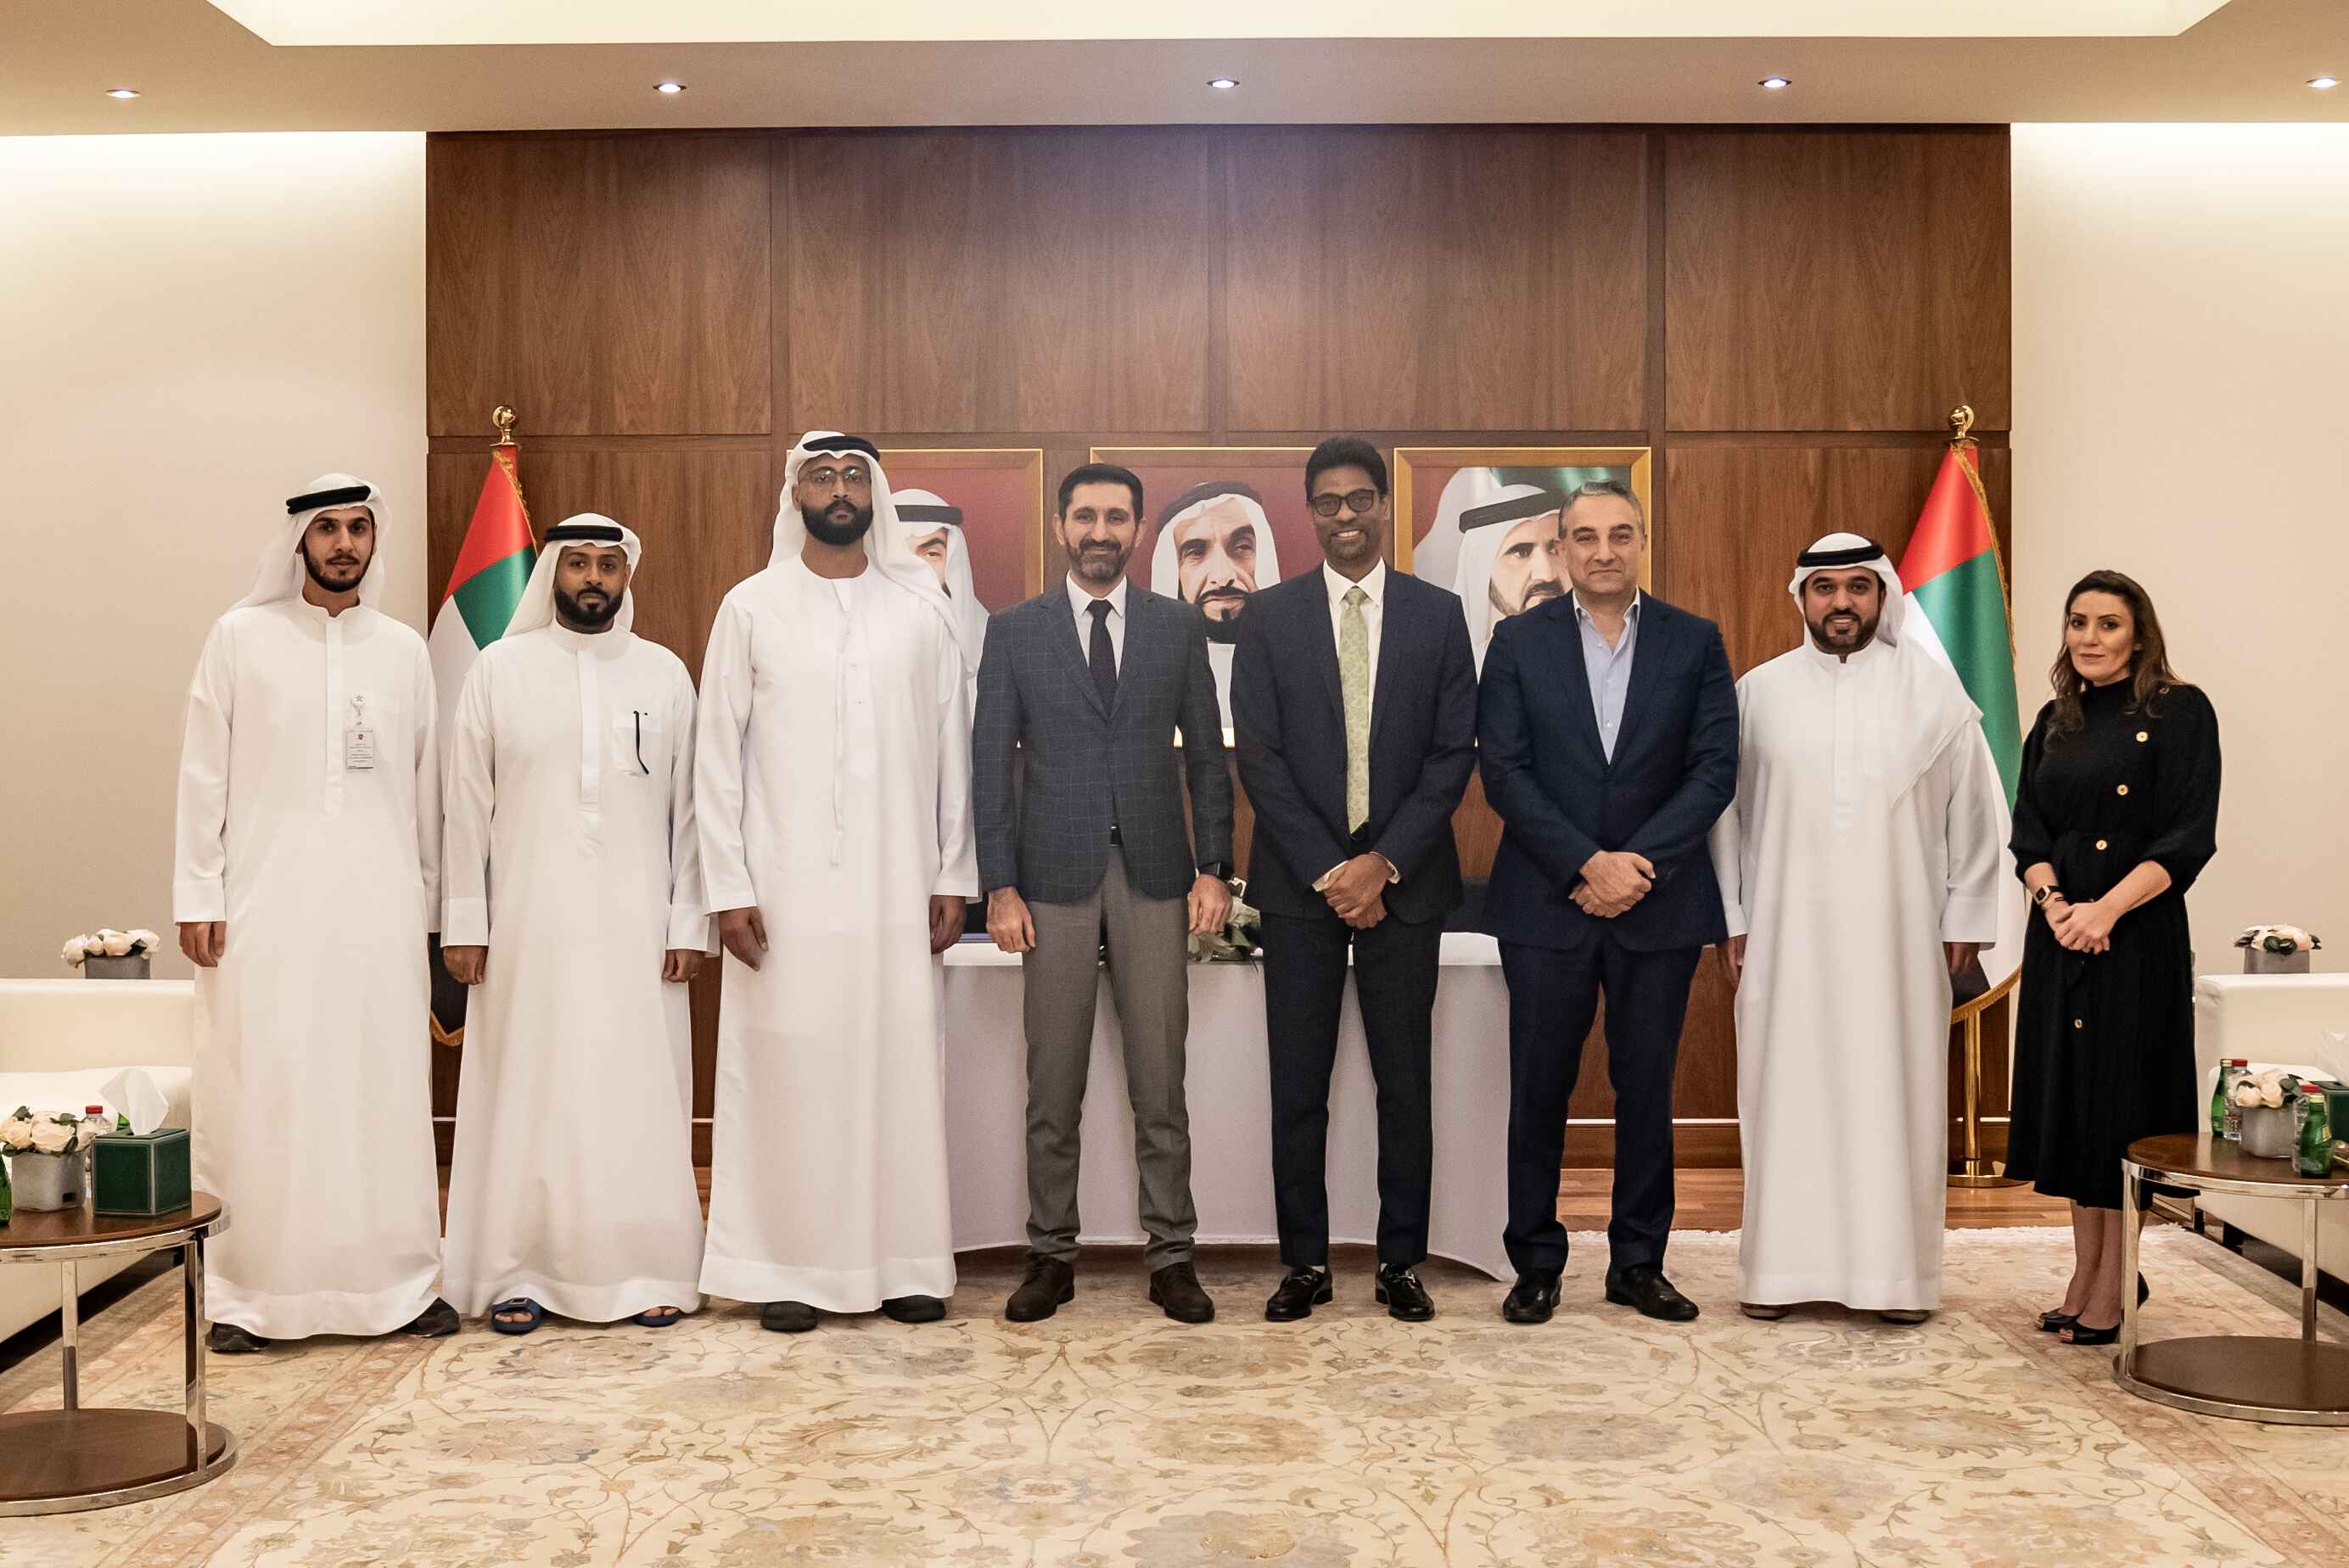 Dubai Healthcare City Authority Partners with The DataFlow Group to Provide Exclusive Services for Platinum Verification Services for DHCC Community